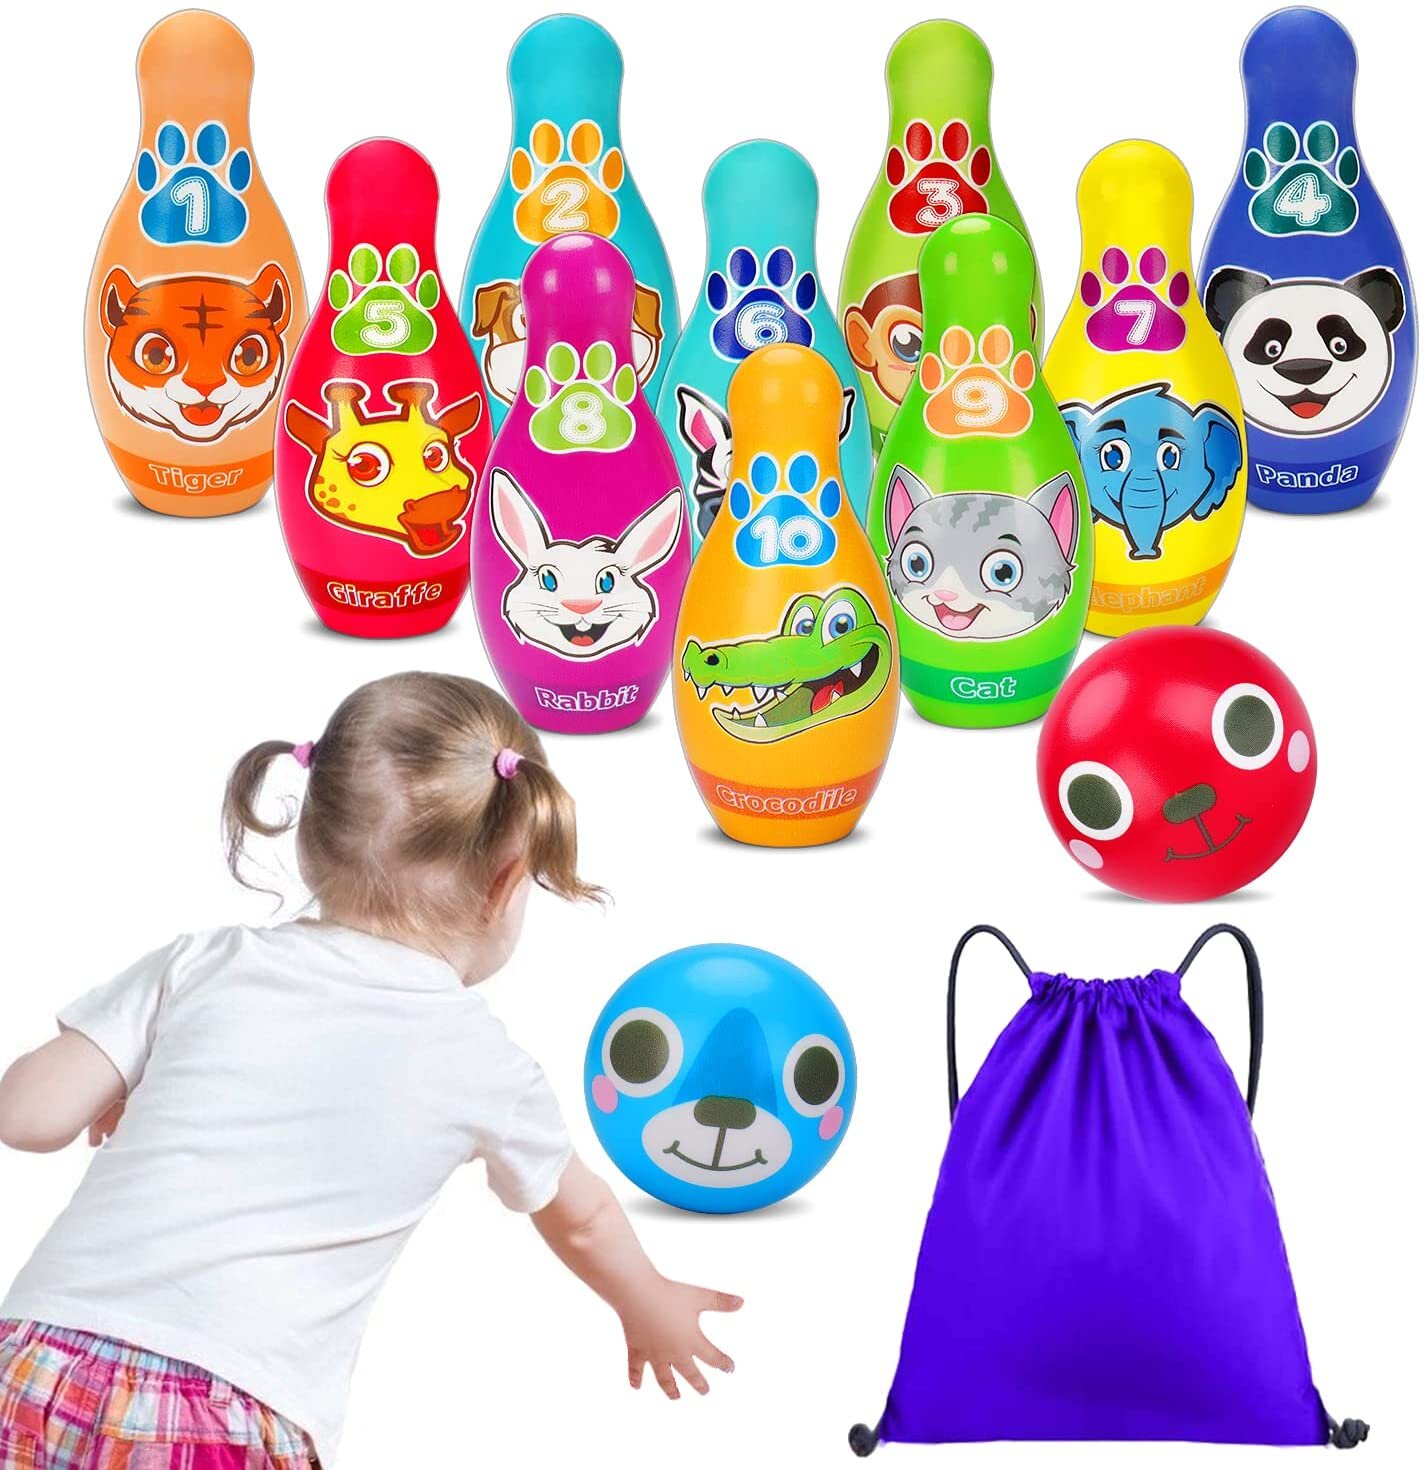 Kids Bowling Toy Set Foam Ball Toys for Children Toddlers Boys Girls age 3 years 